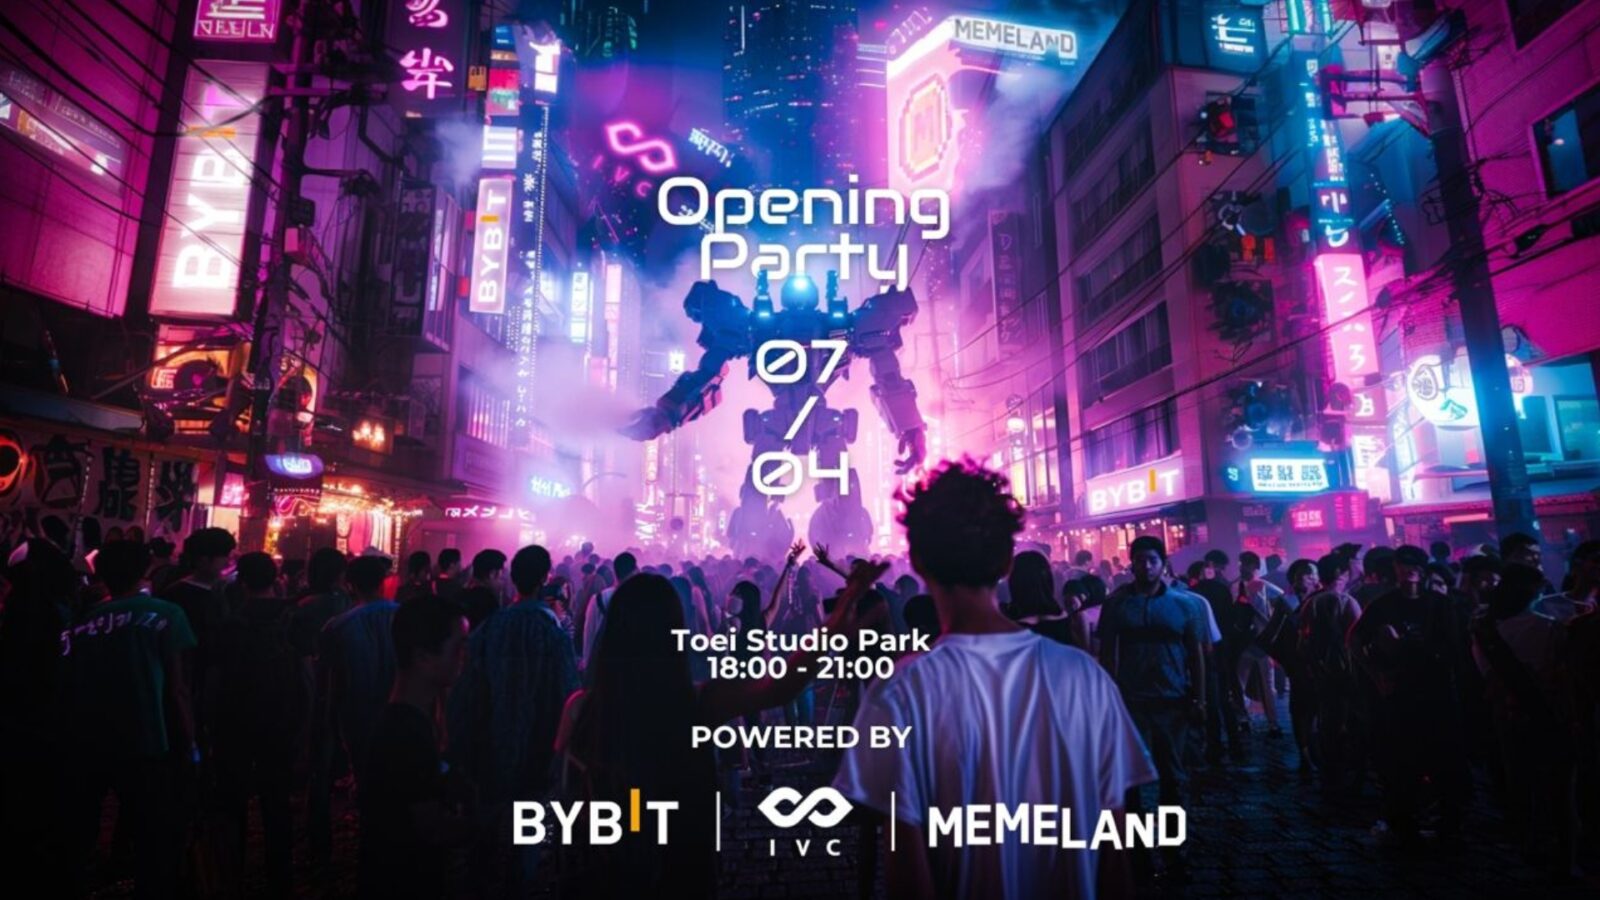 Bybit, a leading global Web3 platform, has proudly announced its major sponsorship role at the upcoming IVC Official Opening Party.